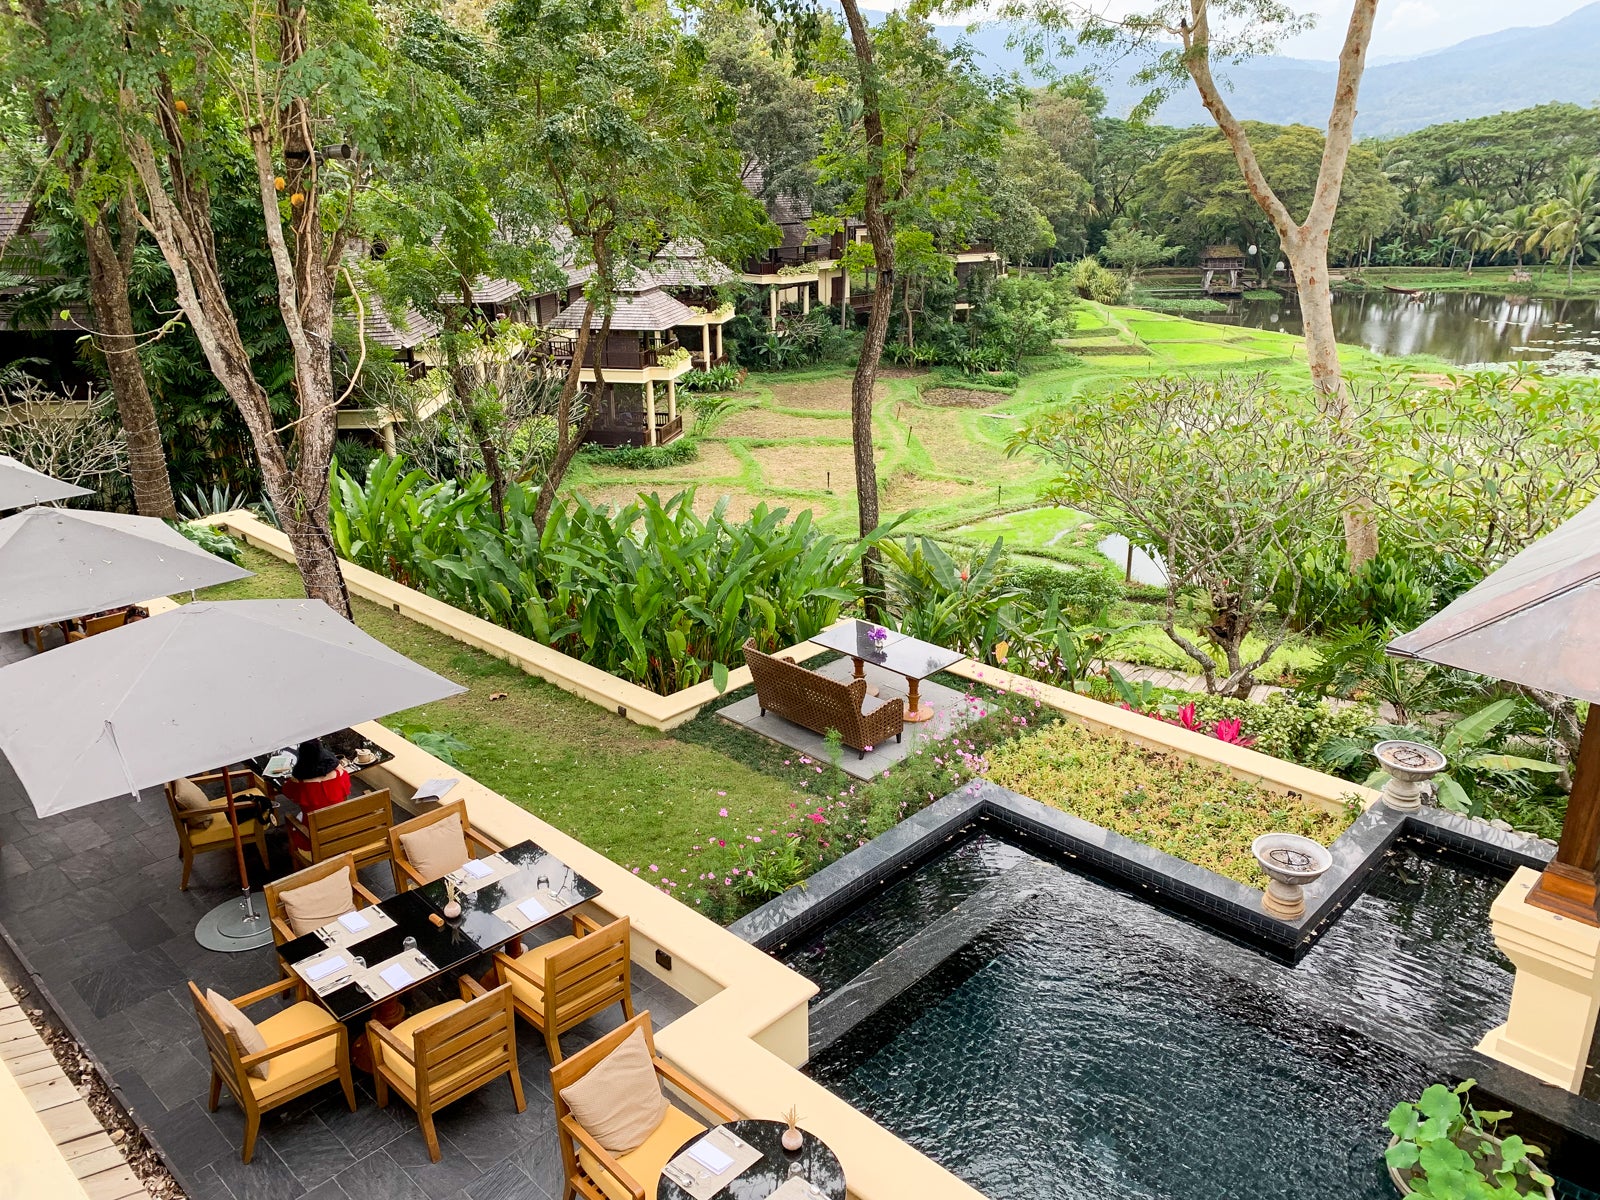 Serene and Green: A Review of the Four Seasons Resort, Chiang Mai